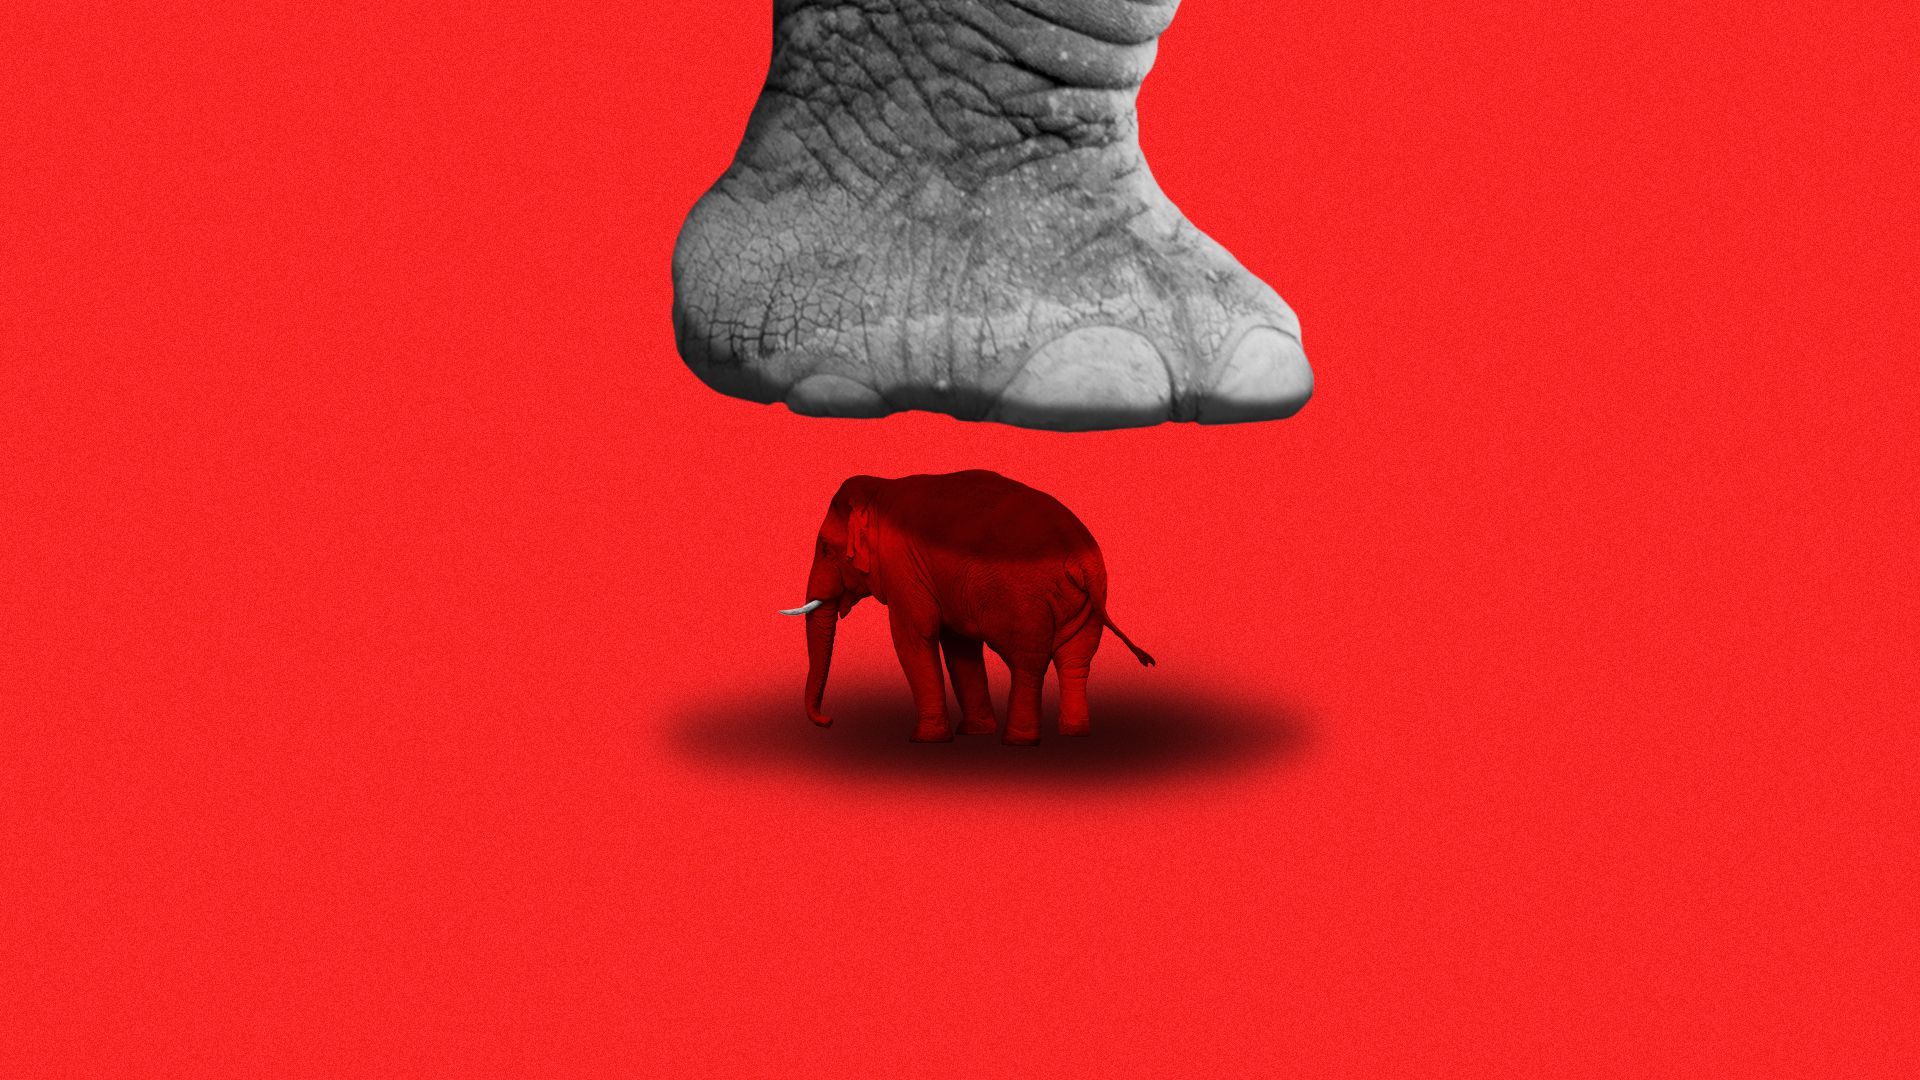 Illustration of a tiny elephant about to be crushed by the foot of a giant one